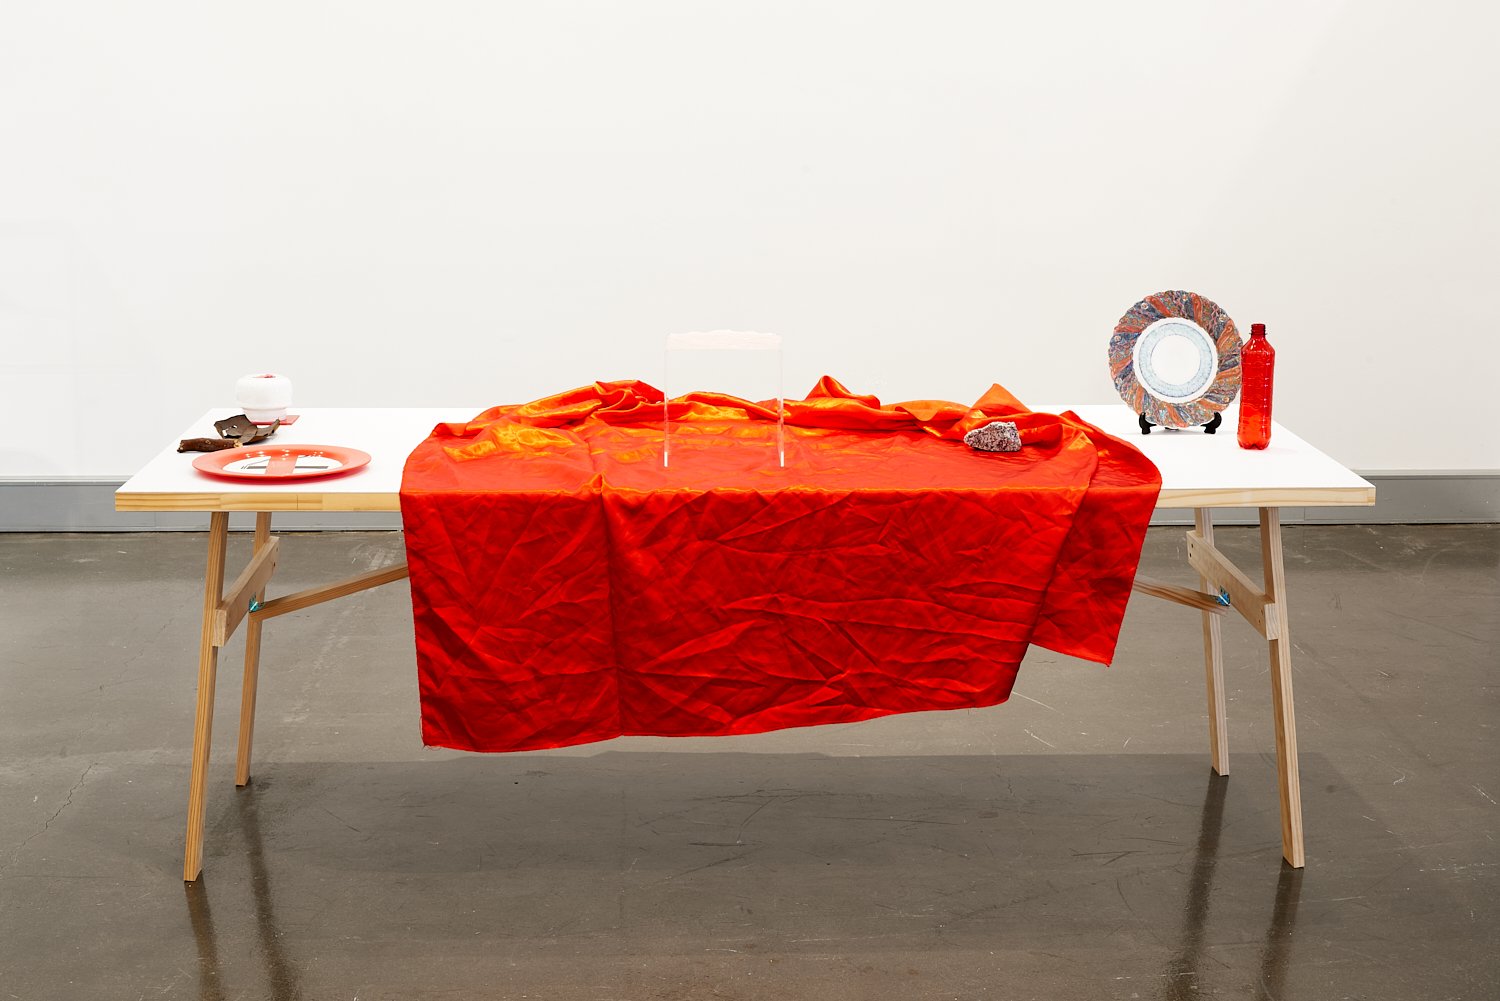 Sarah Goffman, Garbage and the Flowers, 2022, Deakin University Art Gallery, Melbourne, photo: Ross Coulter